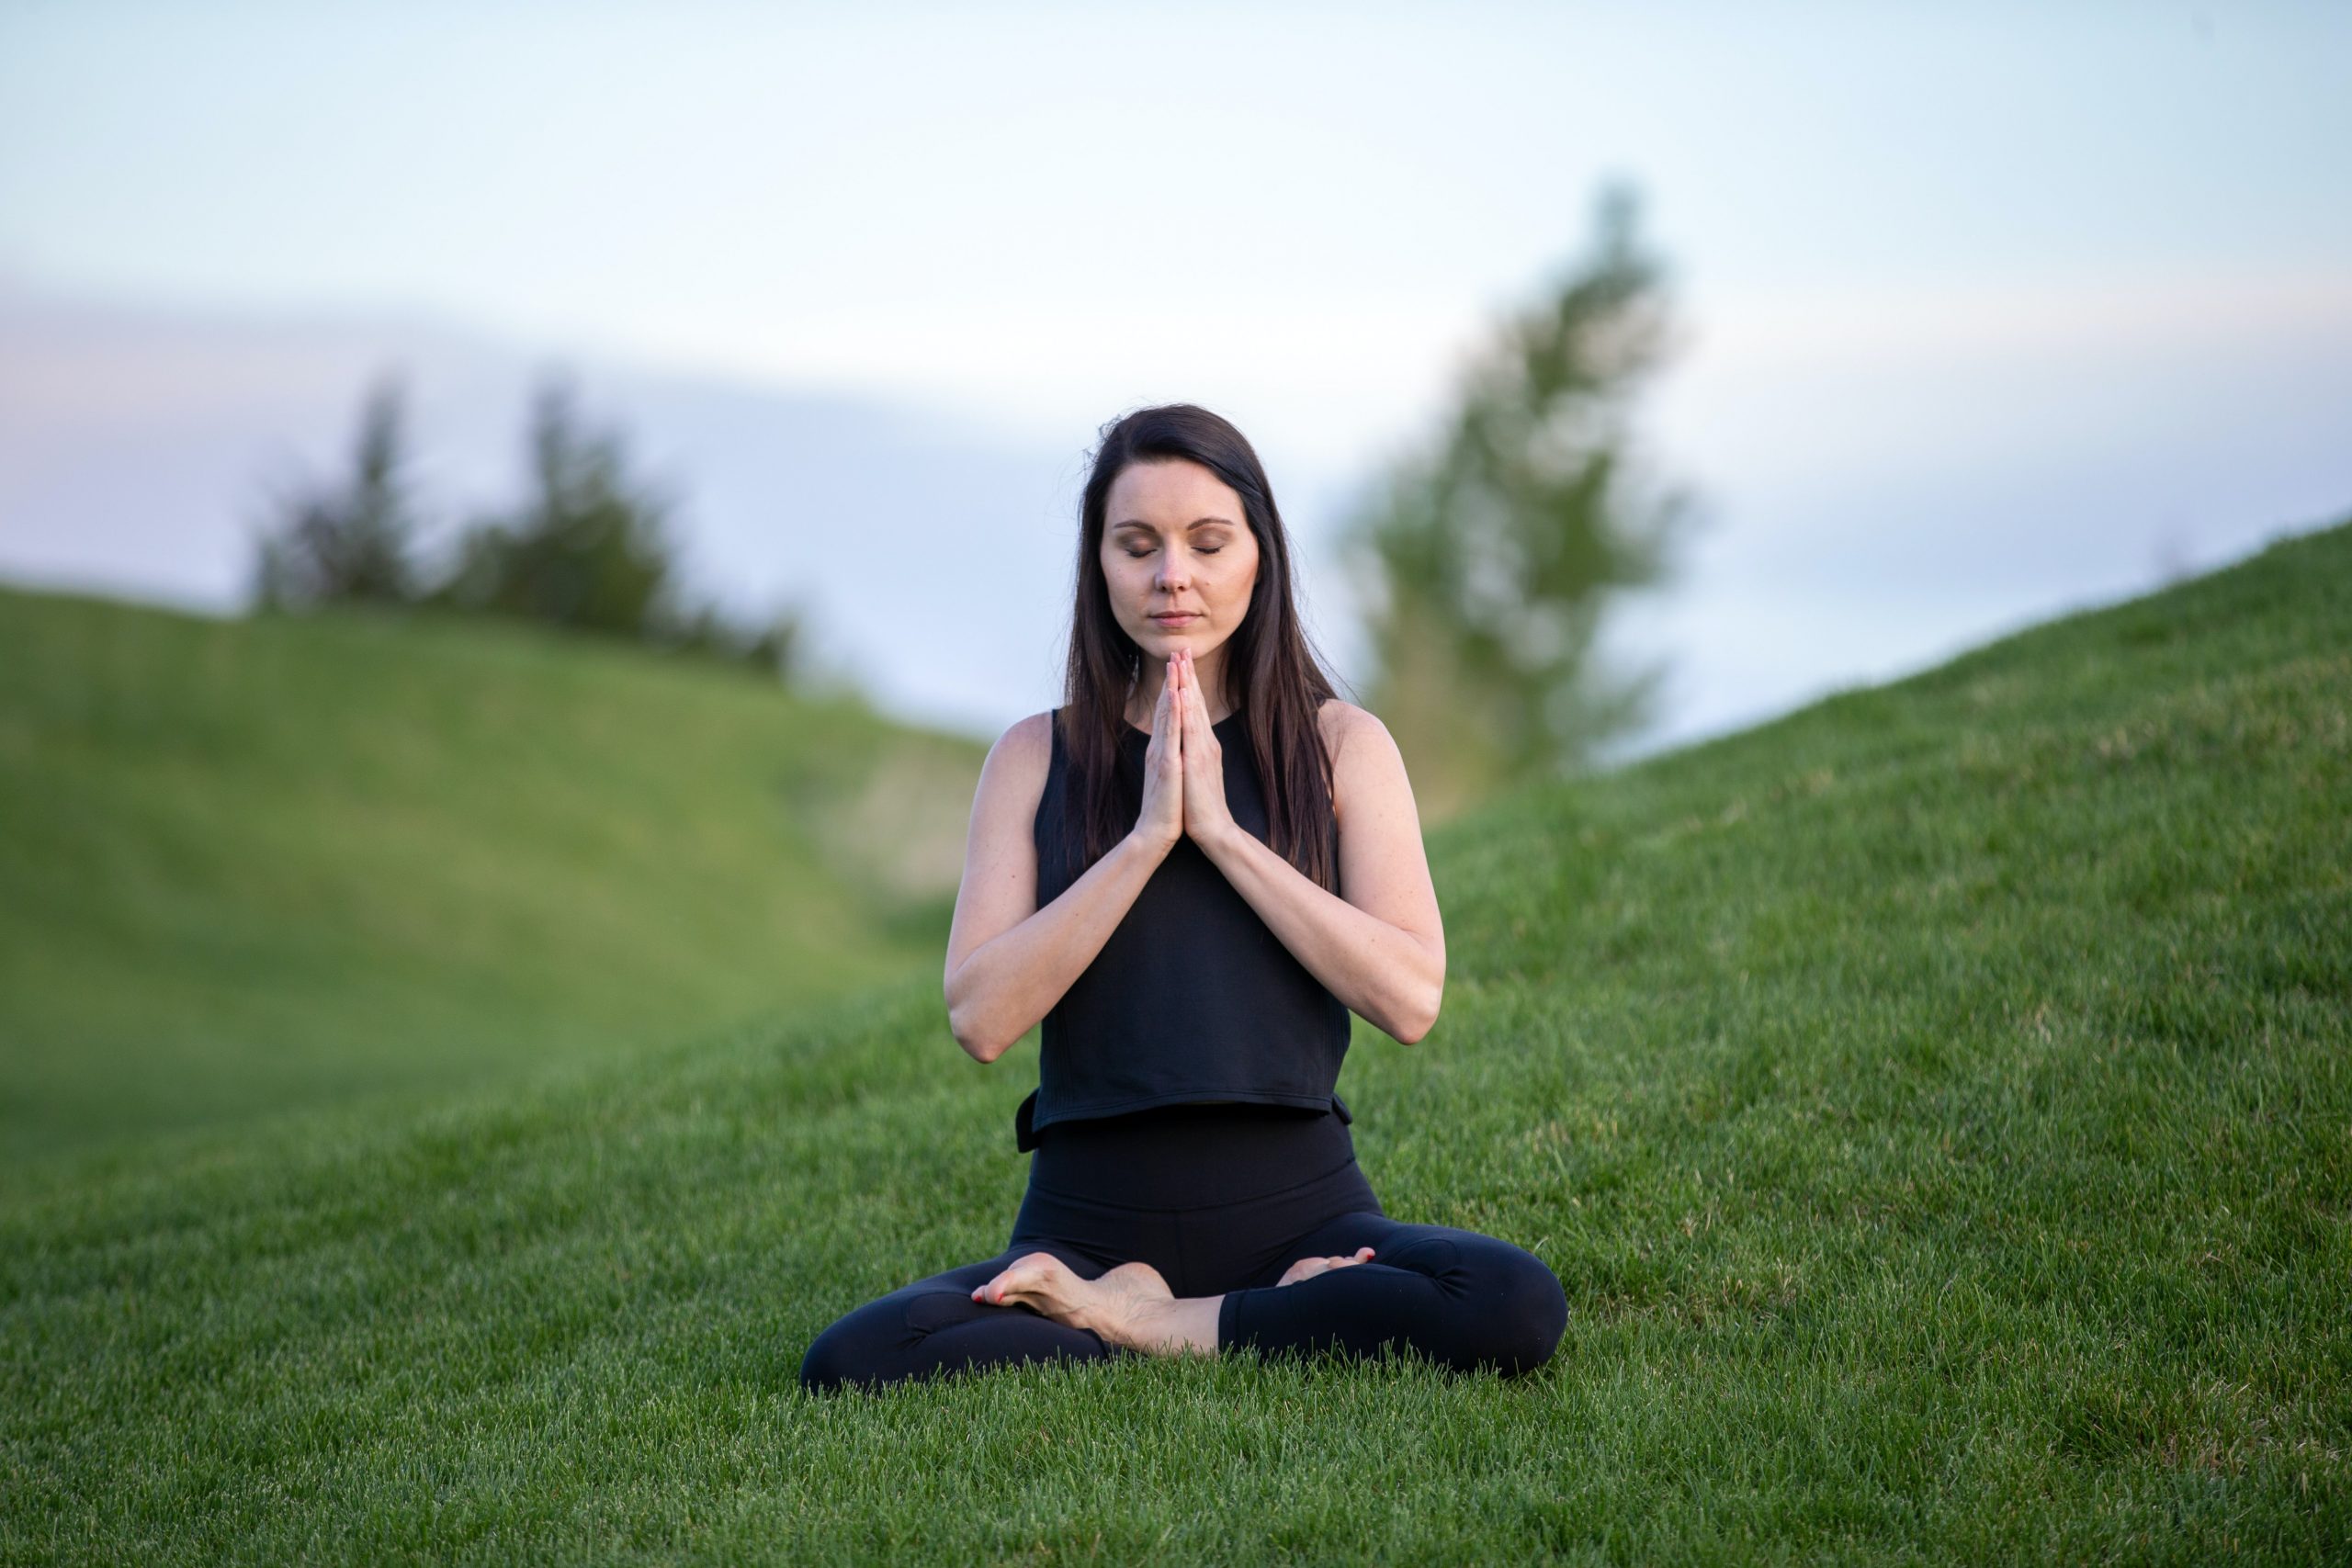 How Does Meditation Help You as You Study for the SSC Exam?